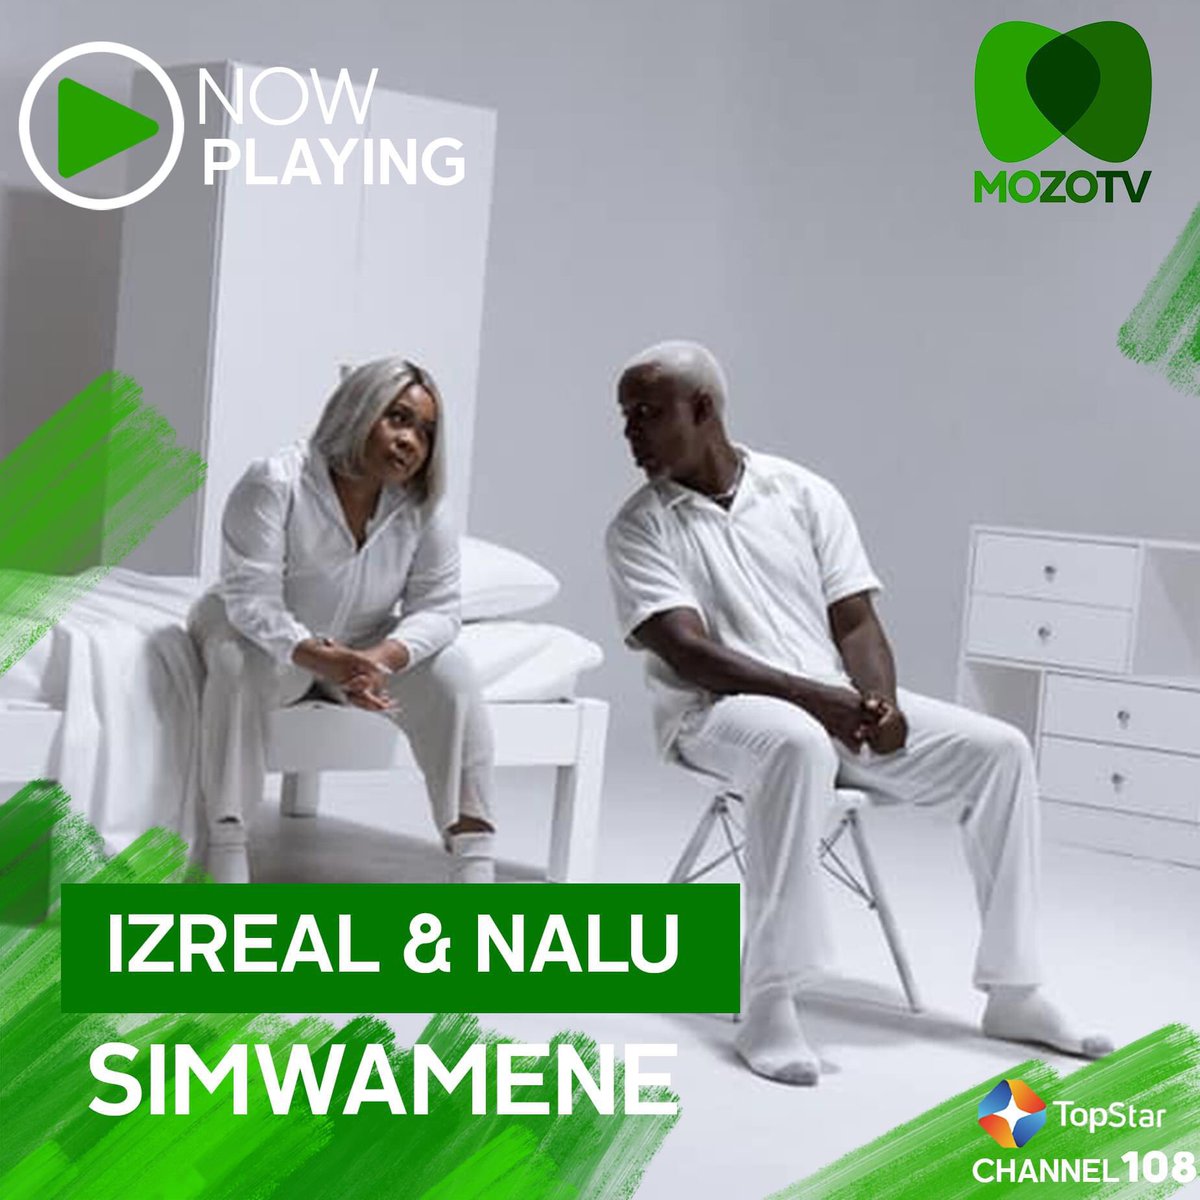 Izrael & Nalu- Simwamene 💃  #NowPlaying 

Tune In Now! TopStar Channel 108 and 544 on DTH (Dish)💚
Also, install the Startimes APP via the link below 👇🏾:
play.google.com/store/apps/det…...   

#ARefreshingExperience #NowPlaying